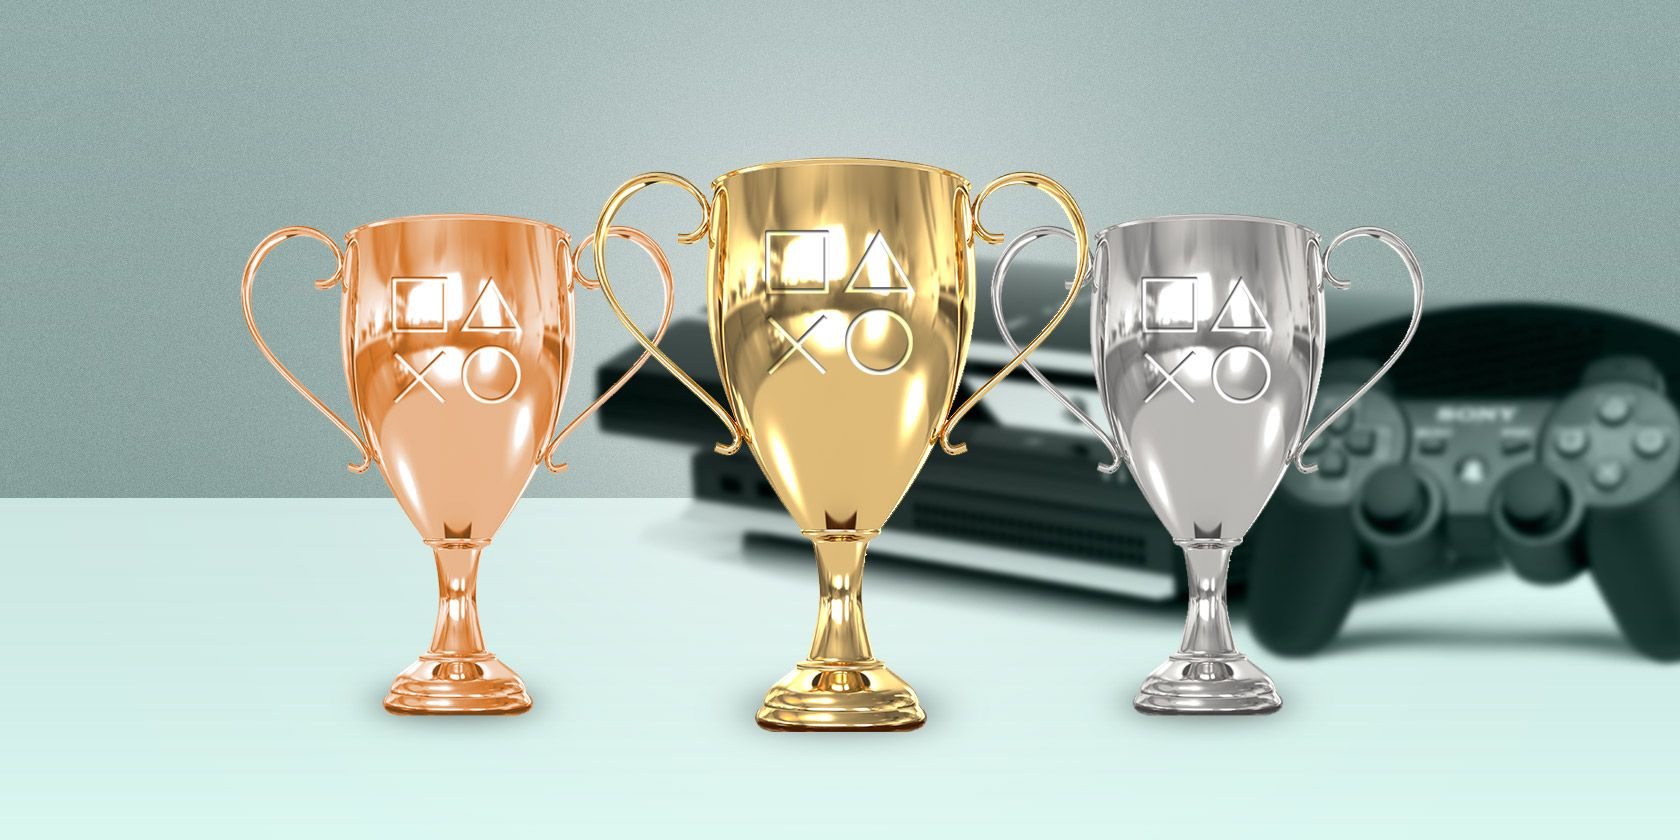 Gold, silver, and bronze trophy in front of a PS3 console and controller